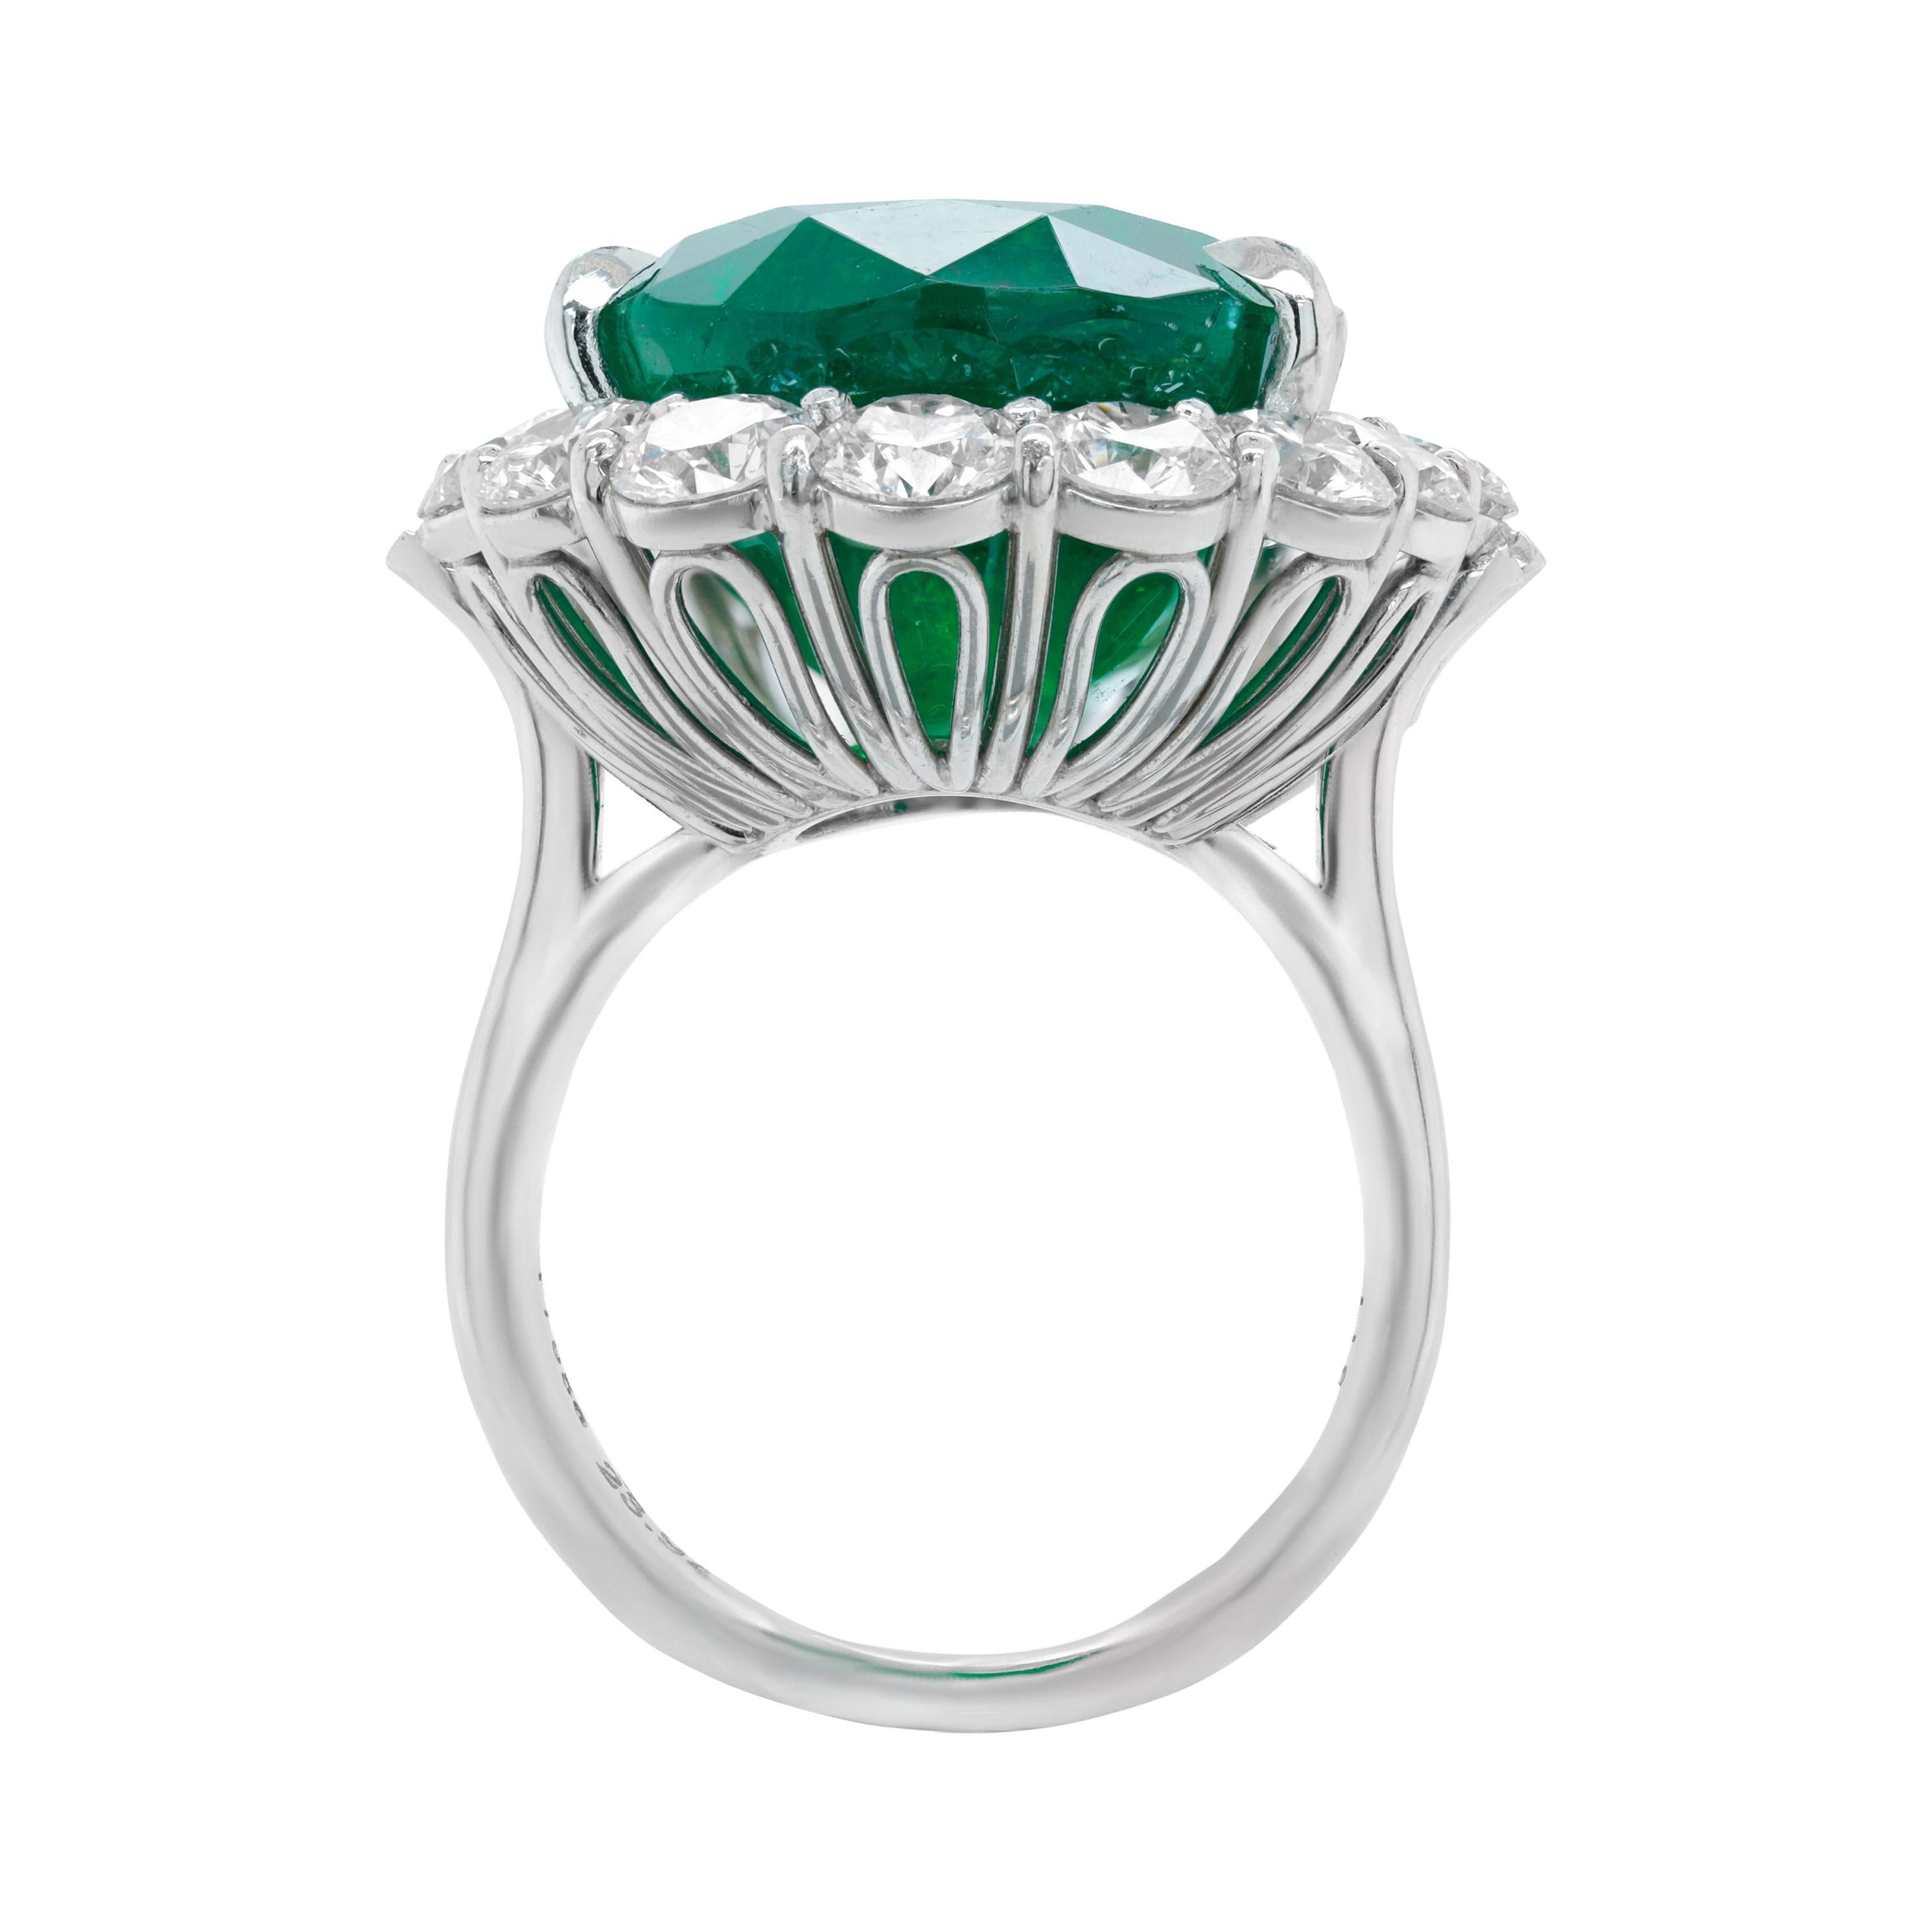 Classic green emerald diamond ring with center gia certified 23.98 natural green emerald/oval shape set with 4.25ct of round diamonds all around  in platinum.
Diana M. is a leading supplier of top-quality fine jewelry for over 35 years.
Diana M is